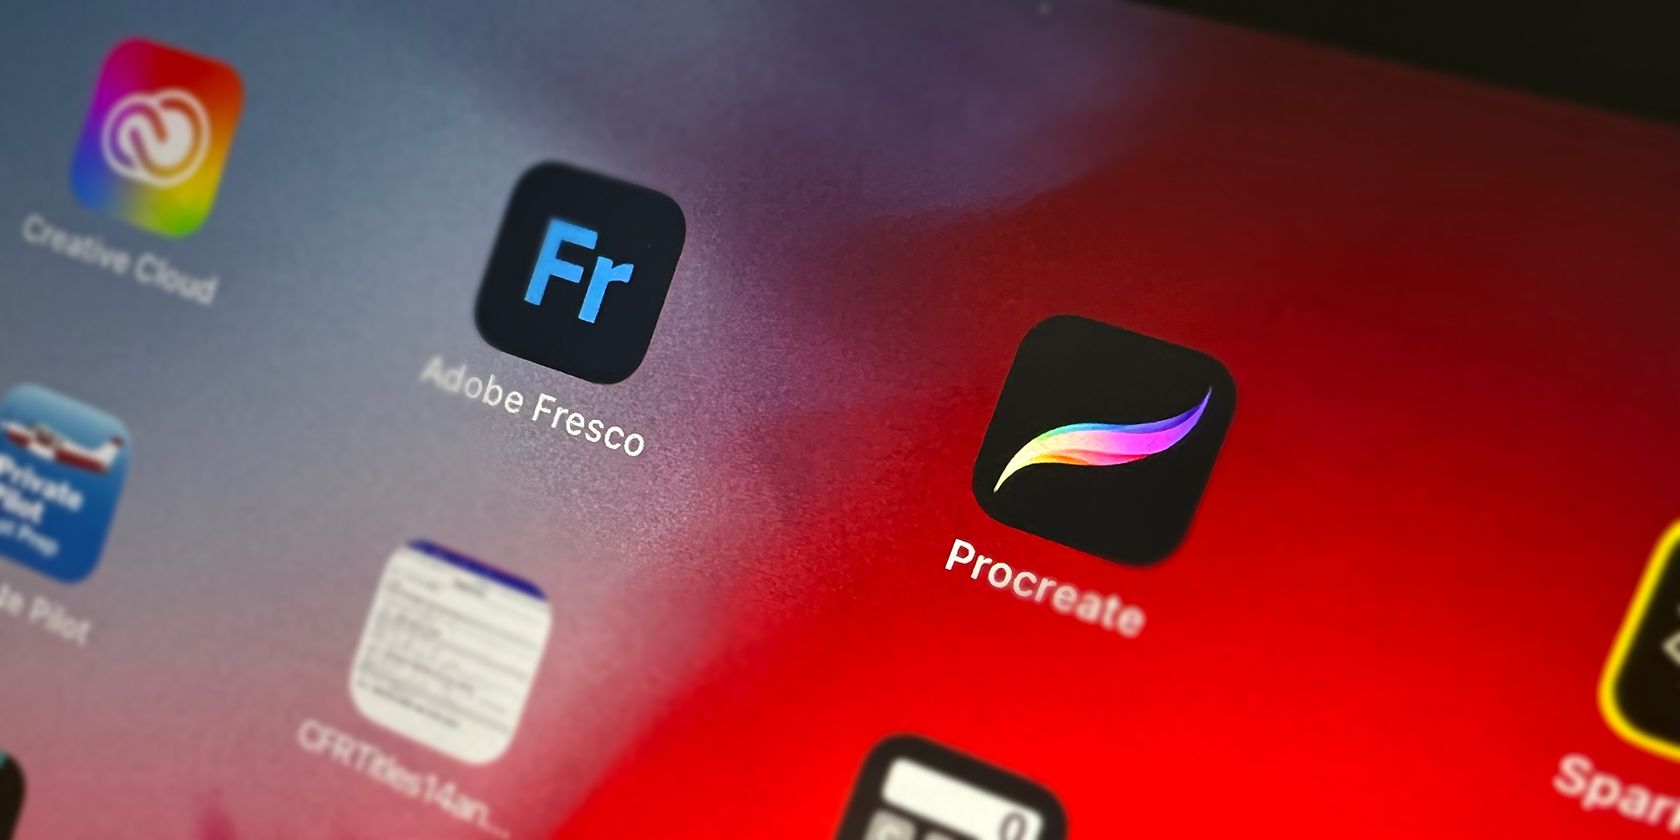 Autodesk Sketchbook Vs Procreate: Which Is Better For Drawing? | 2023